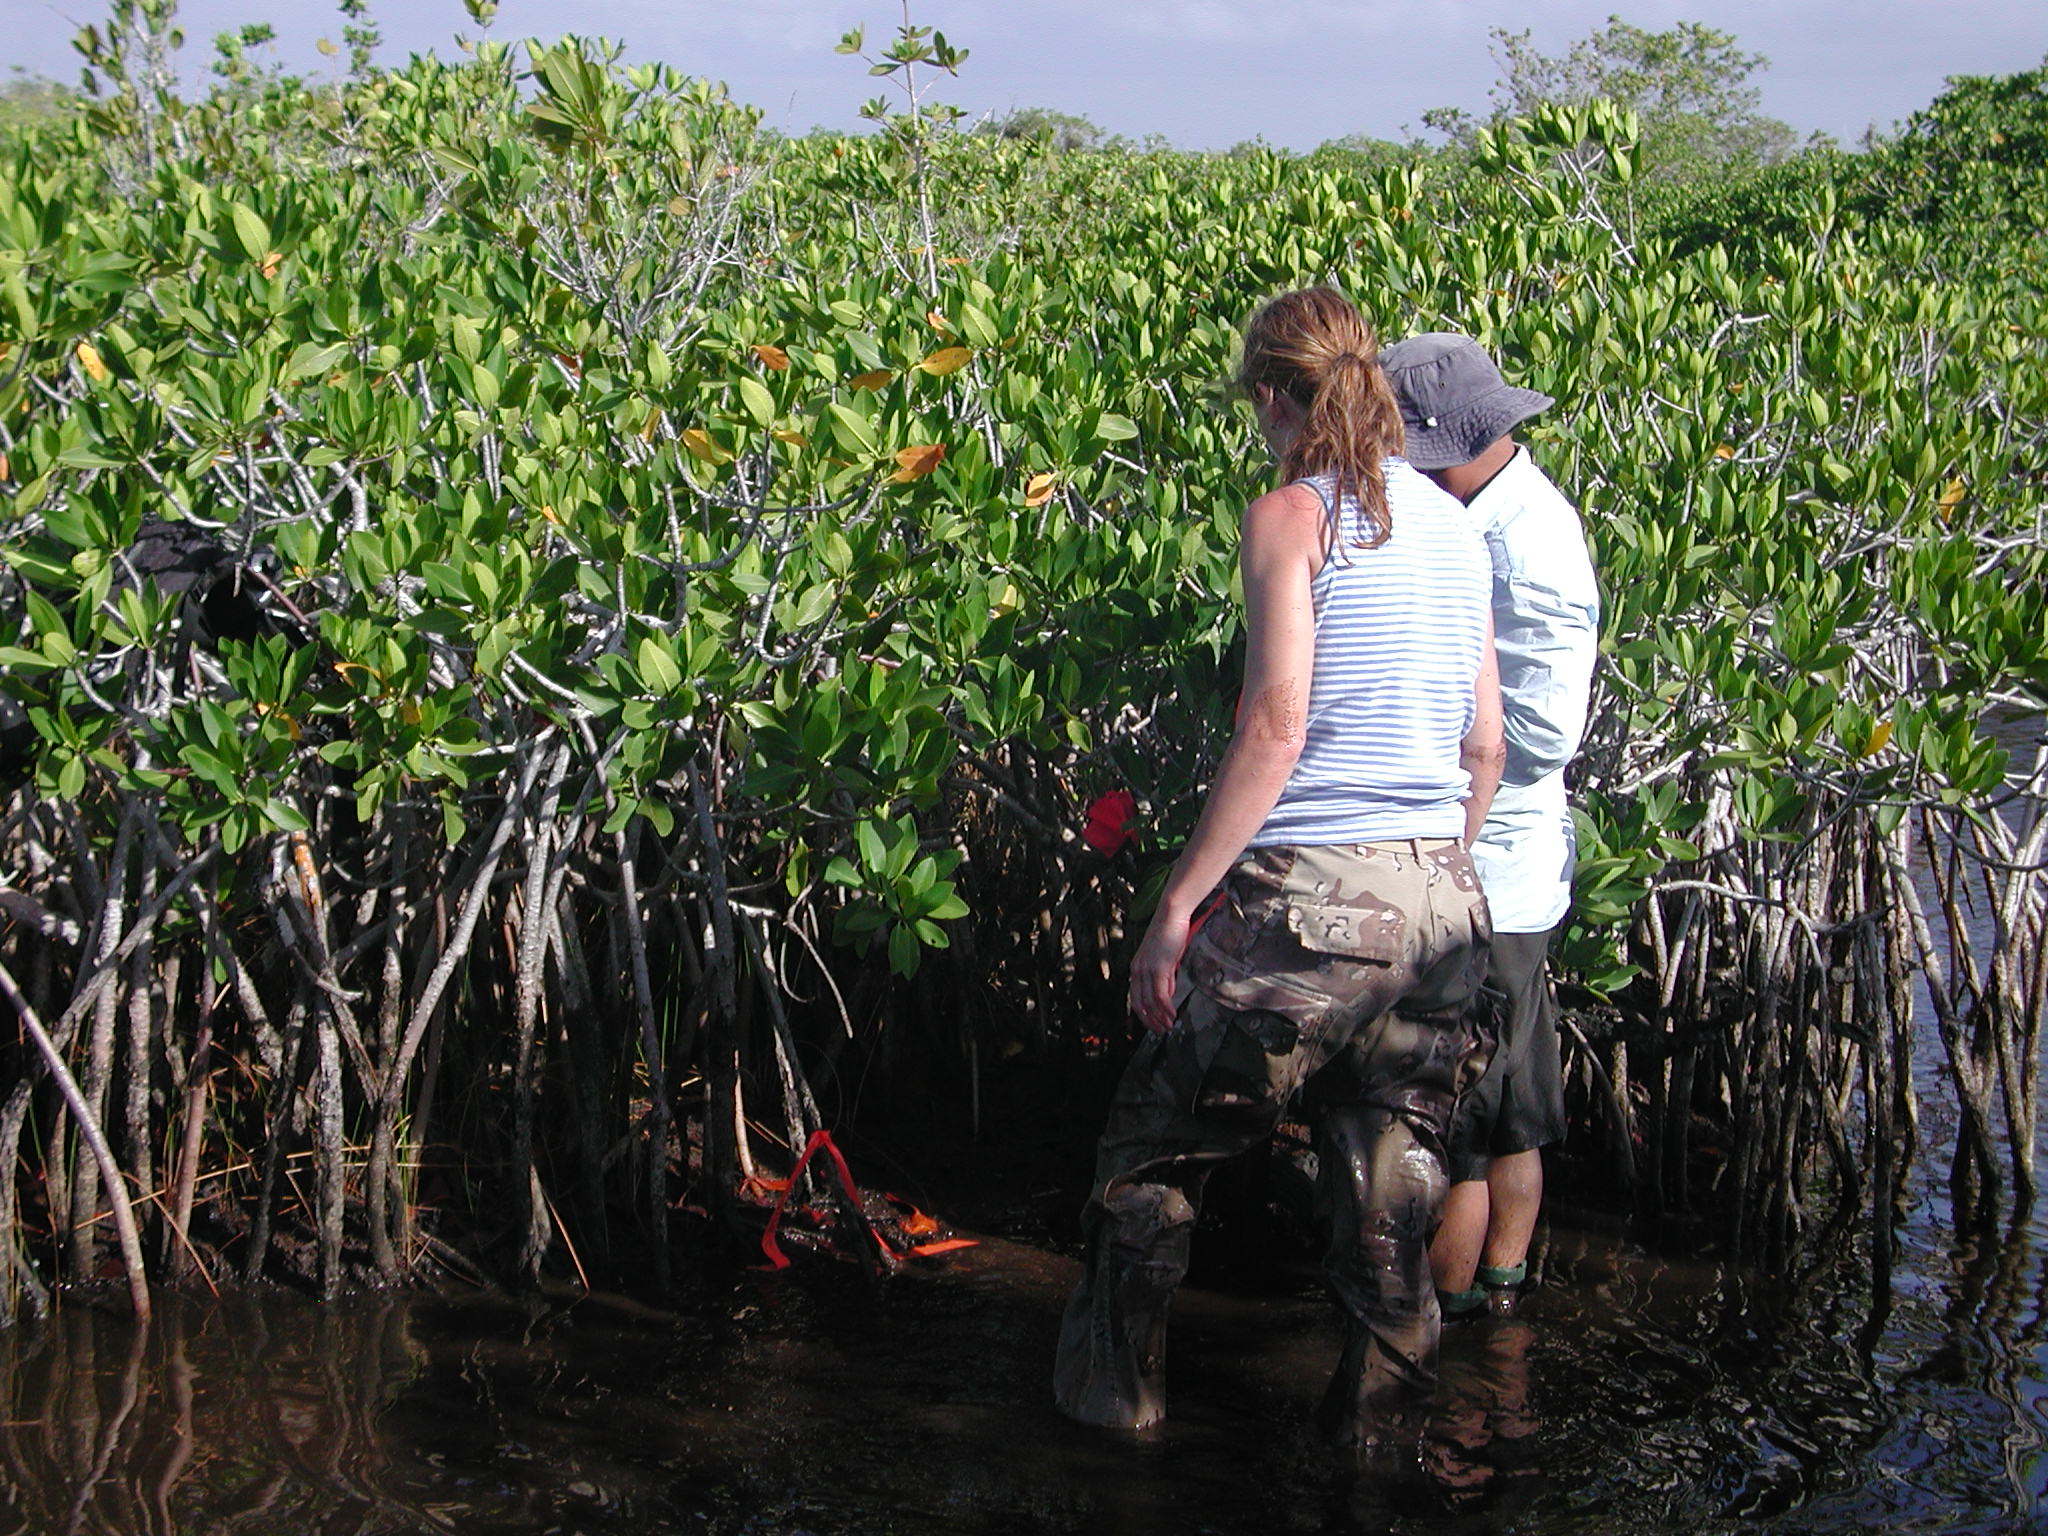 Left to right: Nicole Poret and Carlos Coronado-Molina deploying bags to determine decomposition rates of mangrove fine roots at TS/Ph-6b in Taylor Slough 